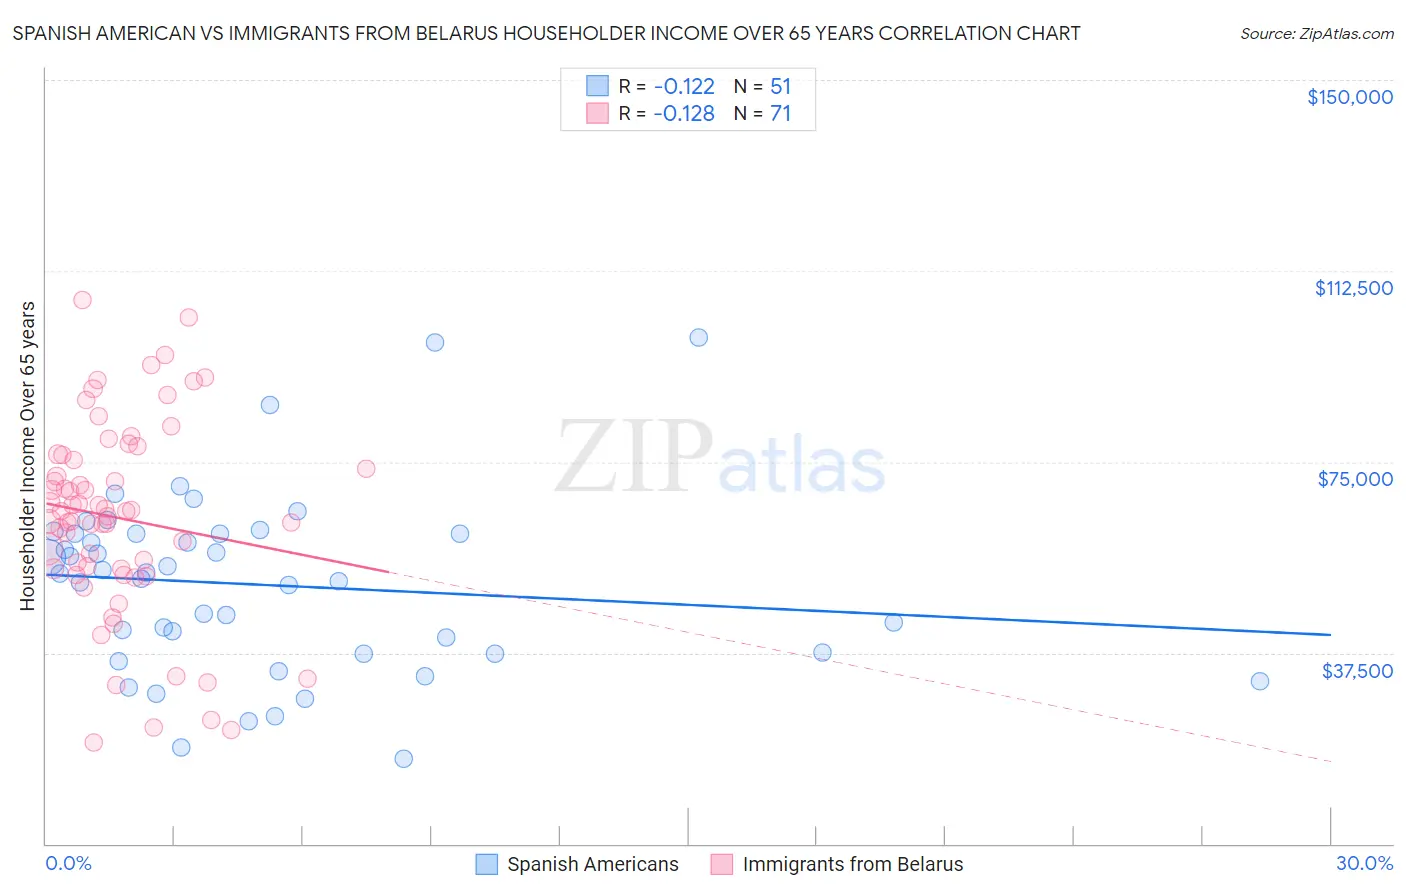 Spanish American vs Immigrants from Belarus Householder Income Over 65 years